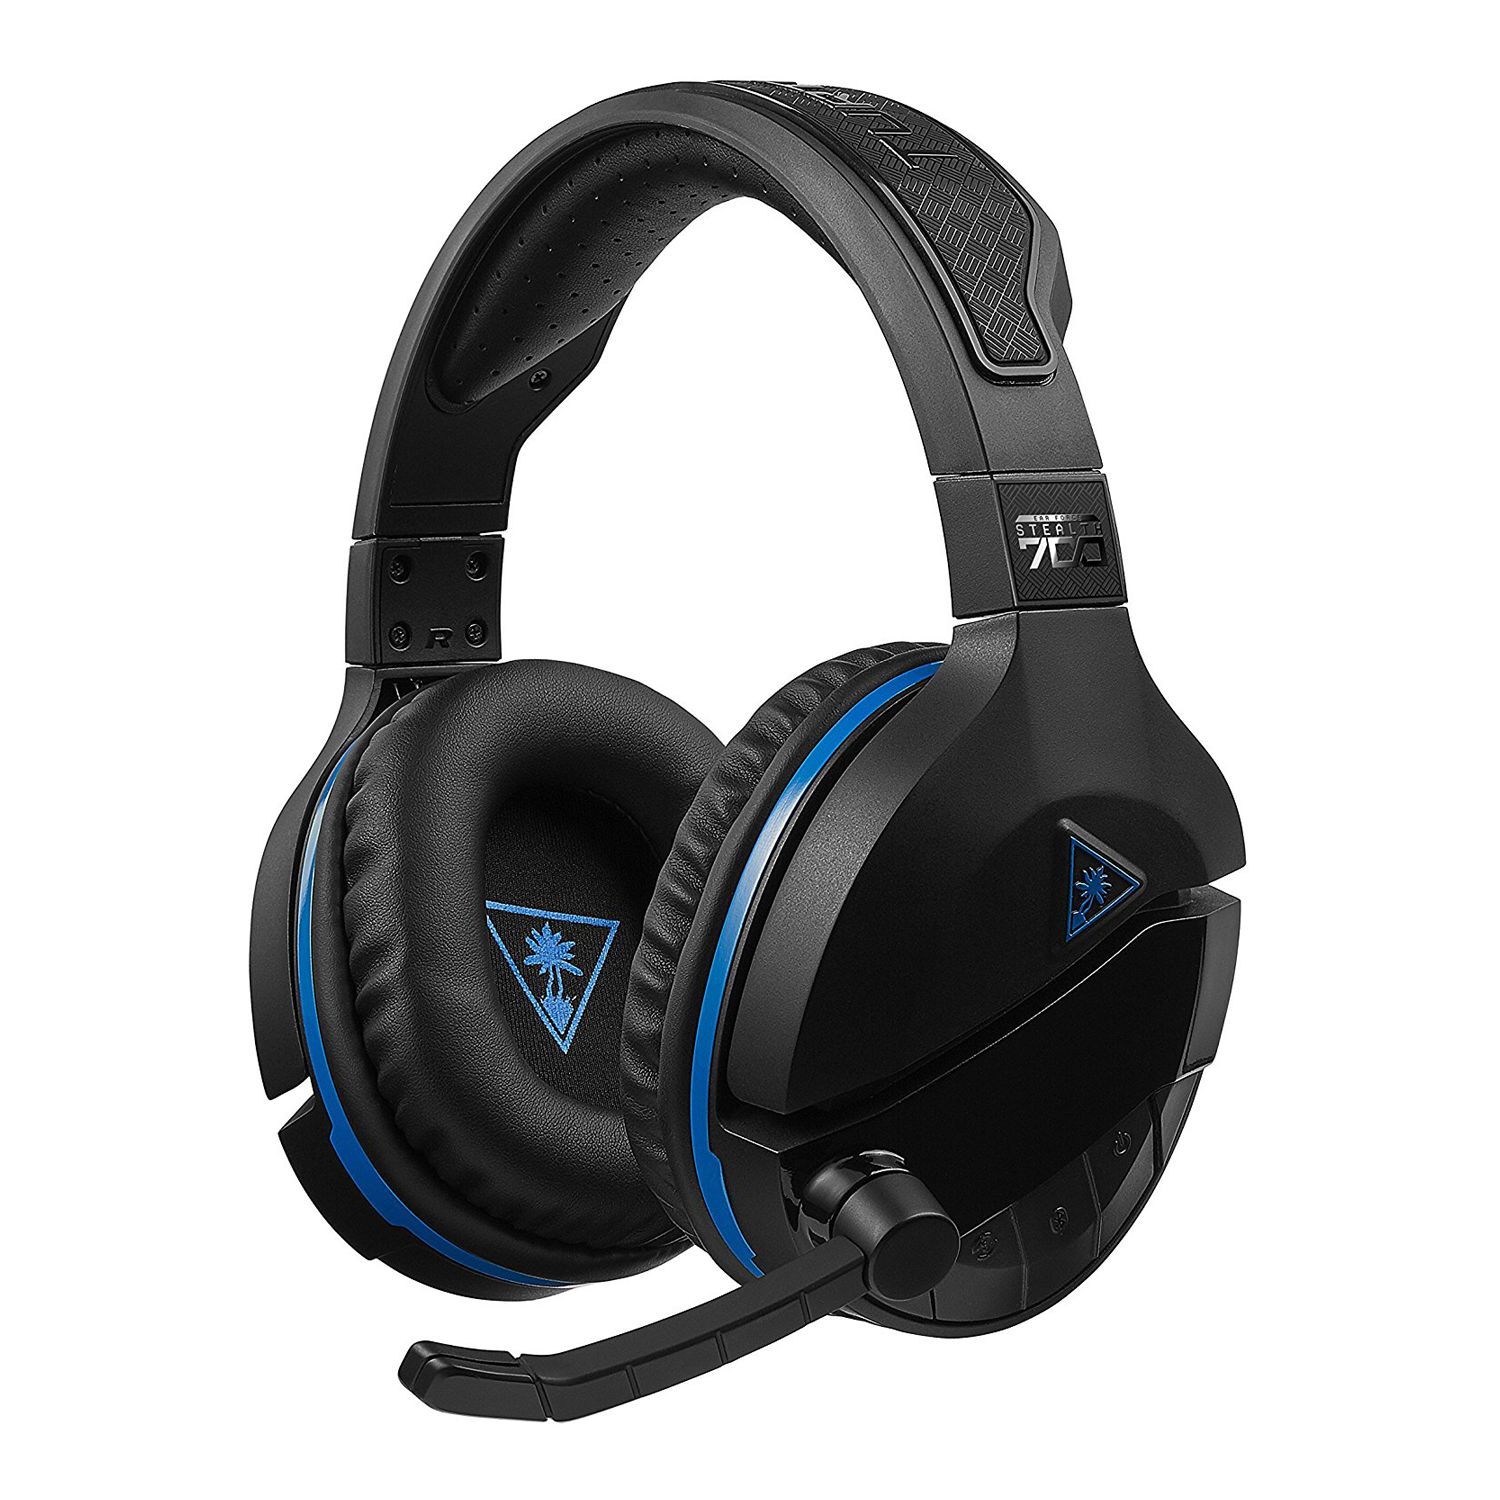 ps4 headset with independent chat and game volume